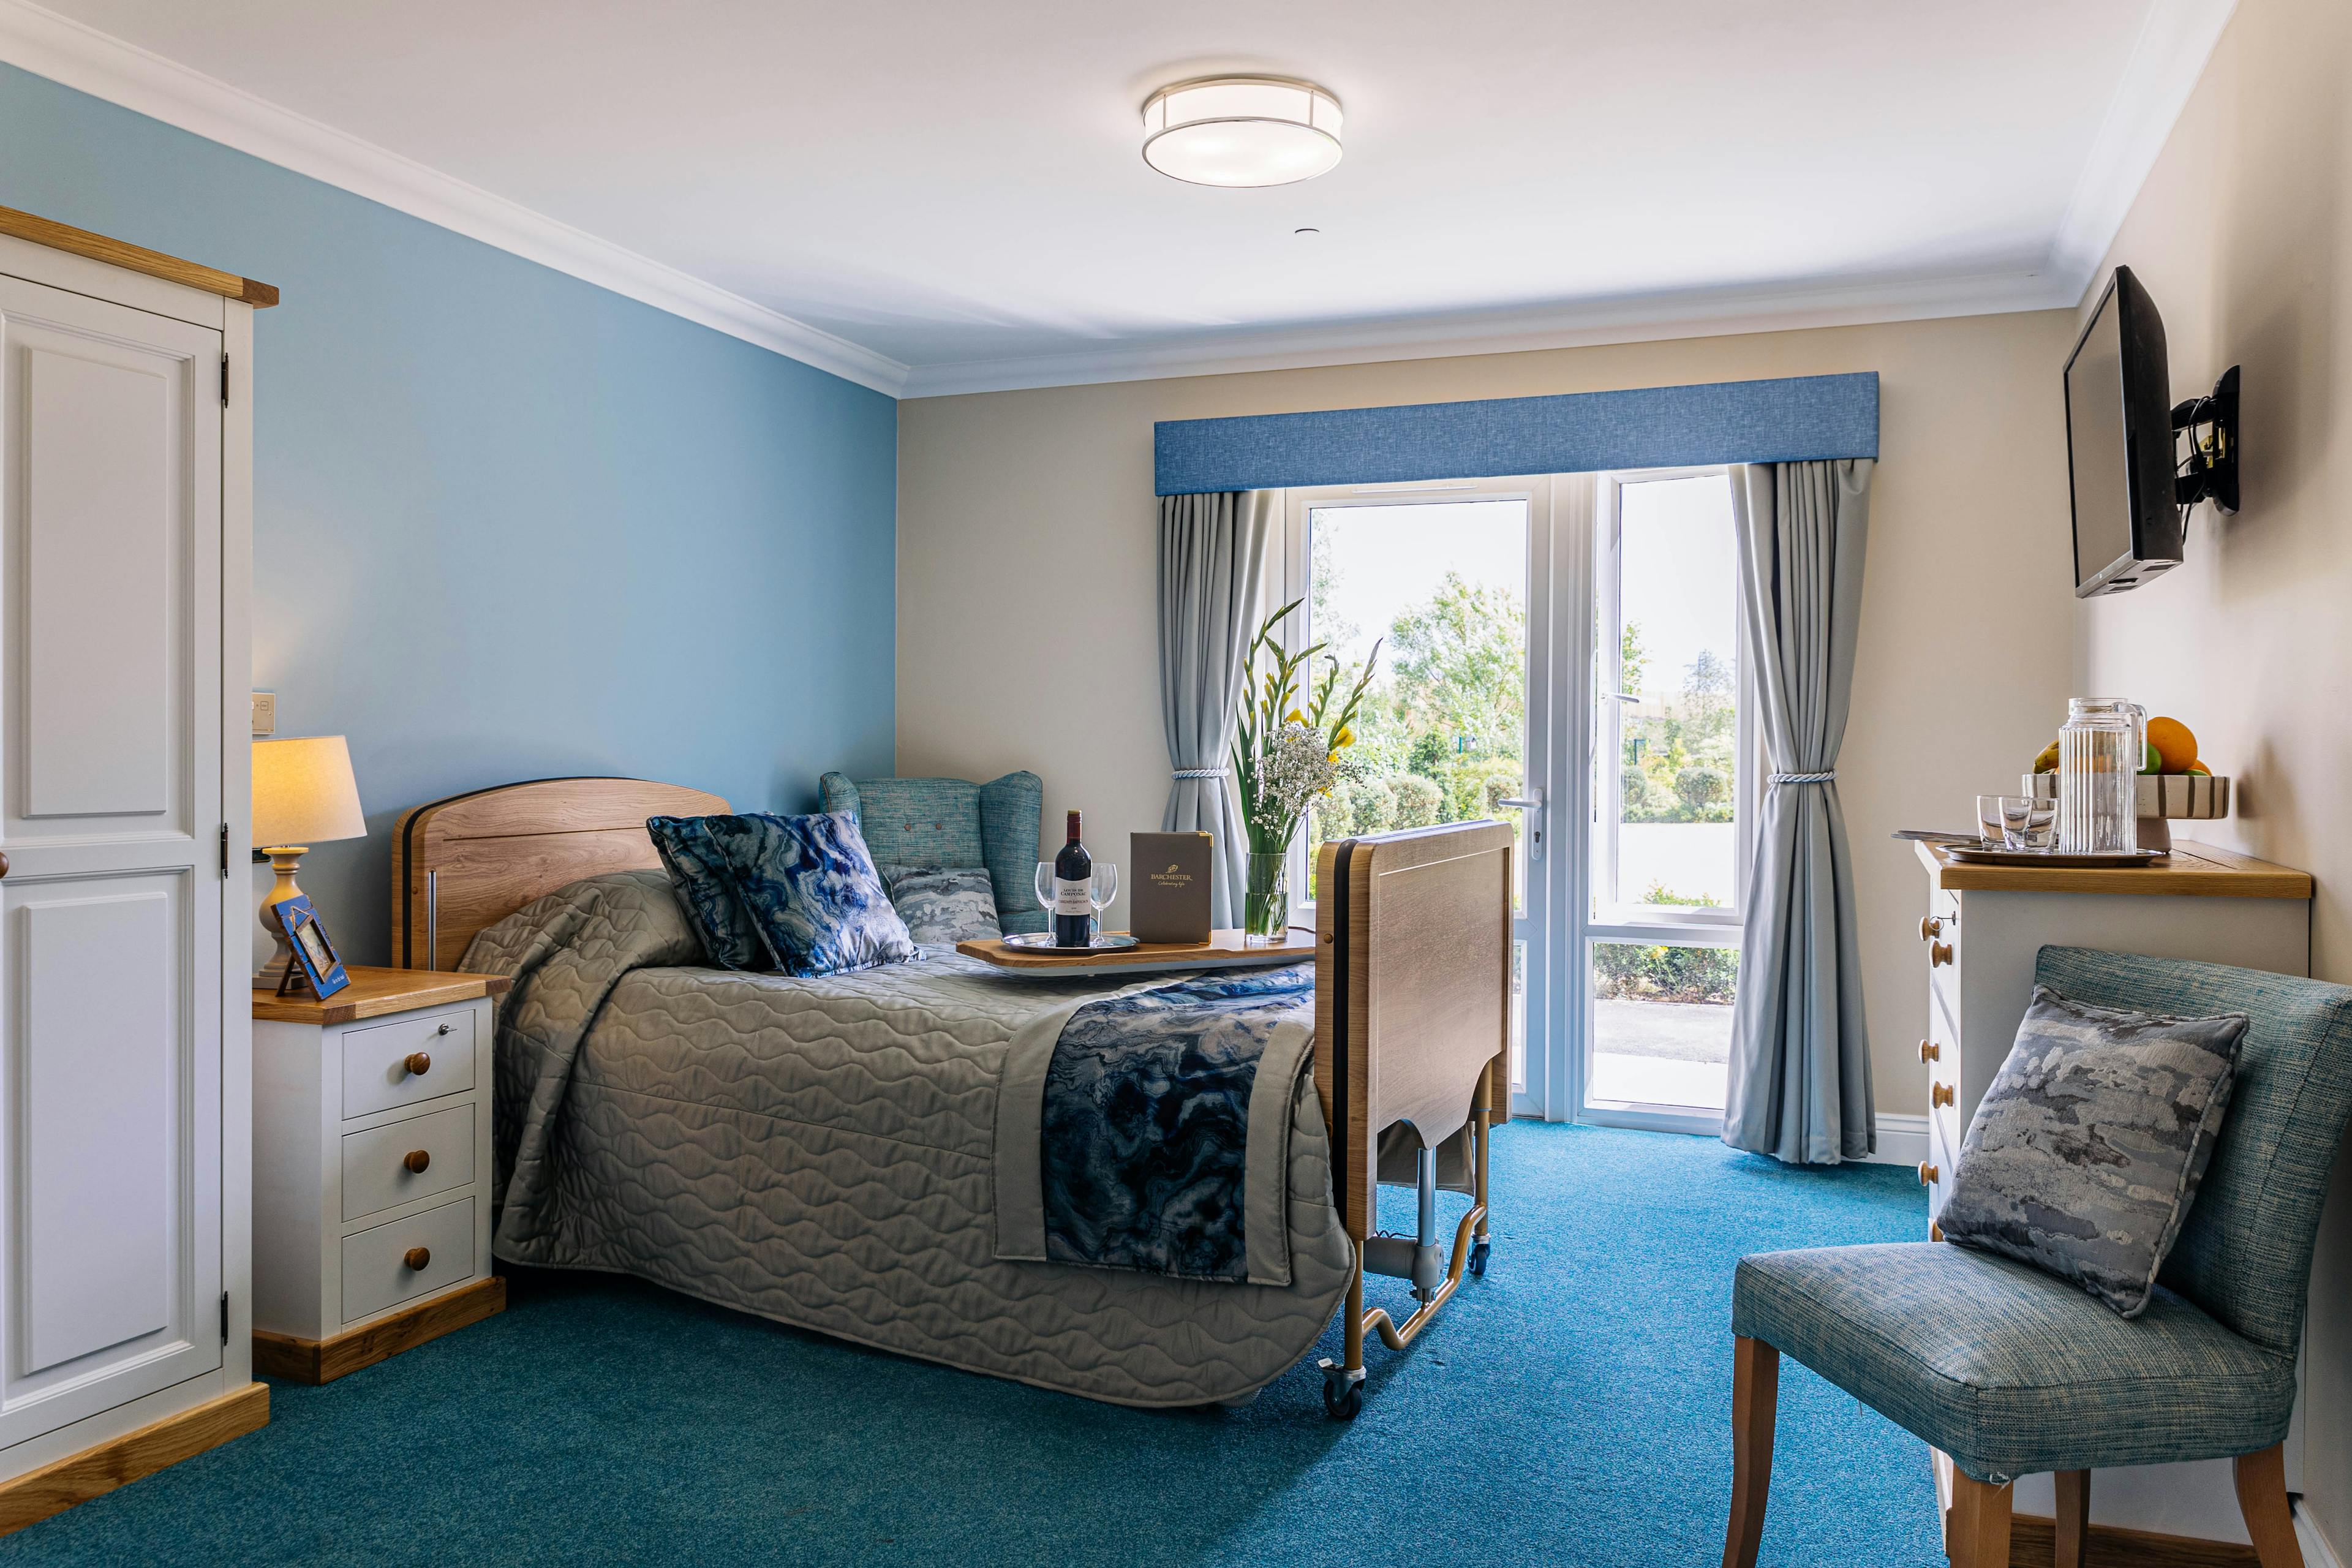 Bedroom at Oak Grange Care Home in Chester, Cheshire